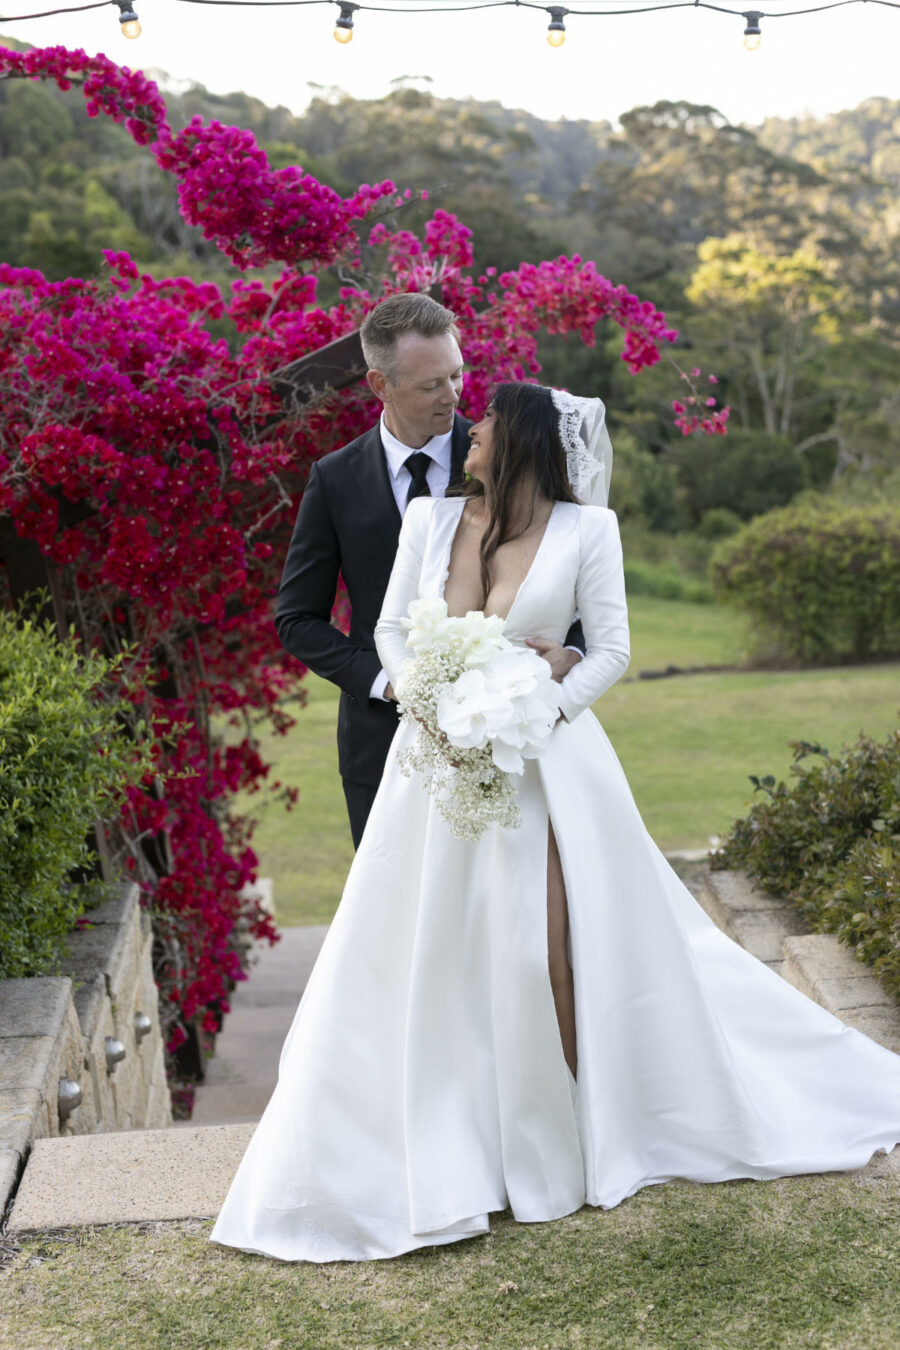 Som and Thomas' wedding at Maleny Manor photographed by Blumenthal Photography